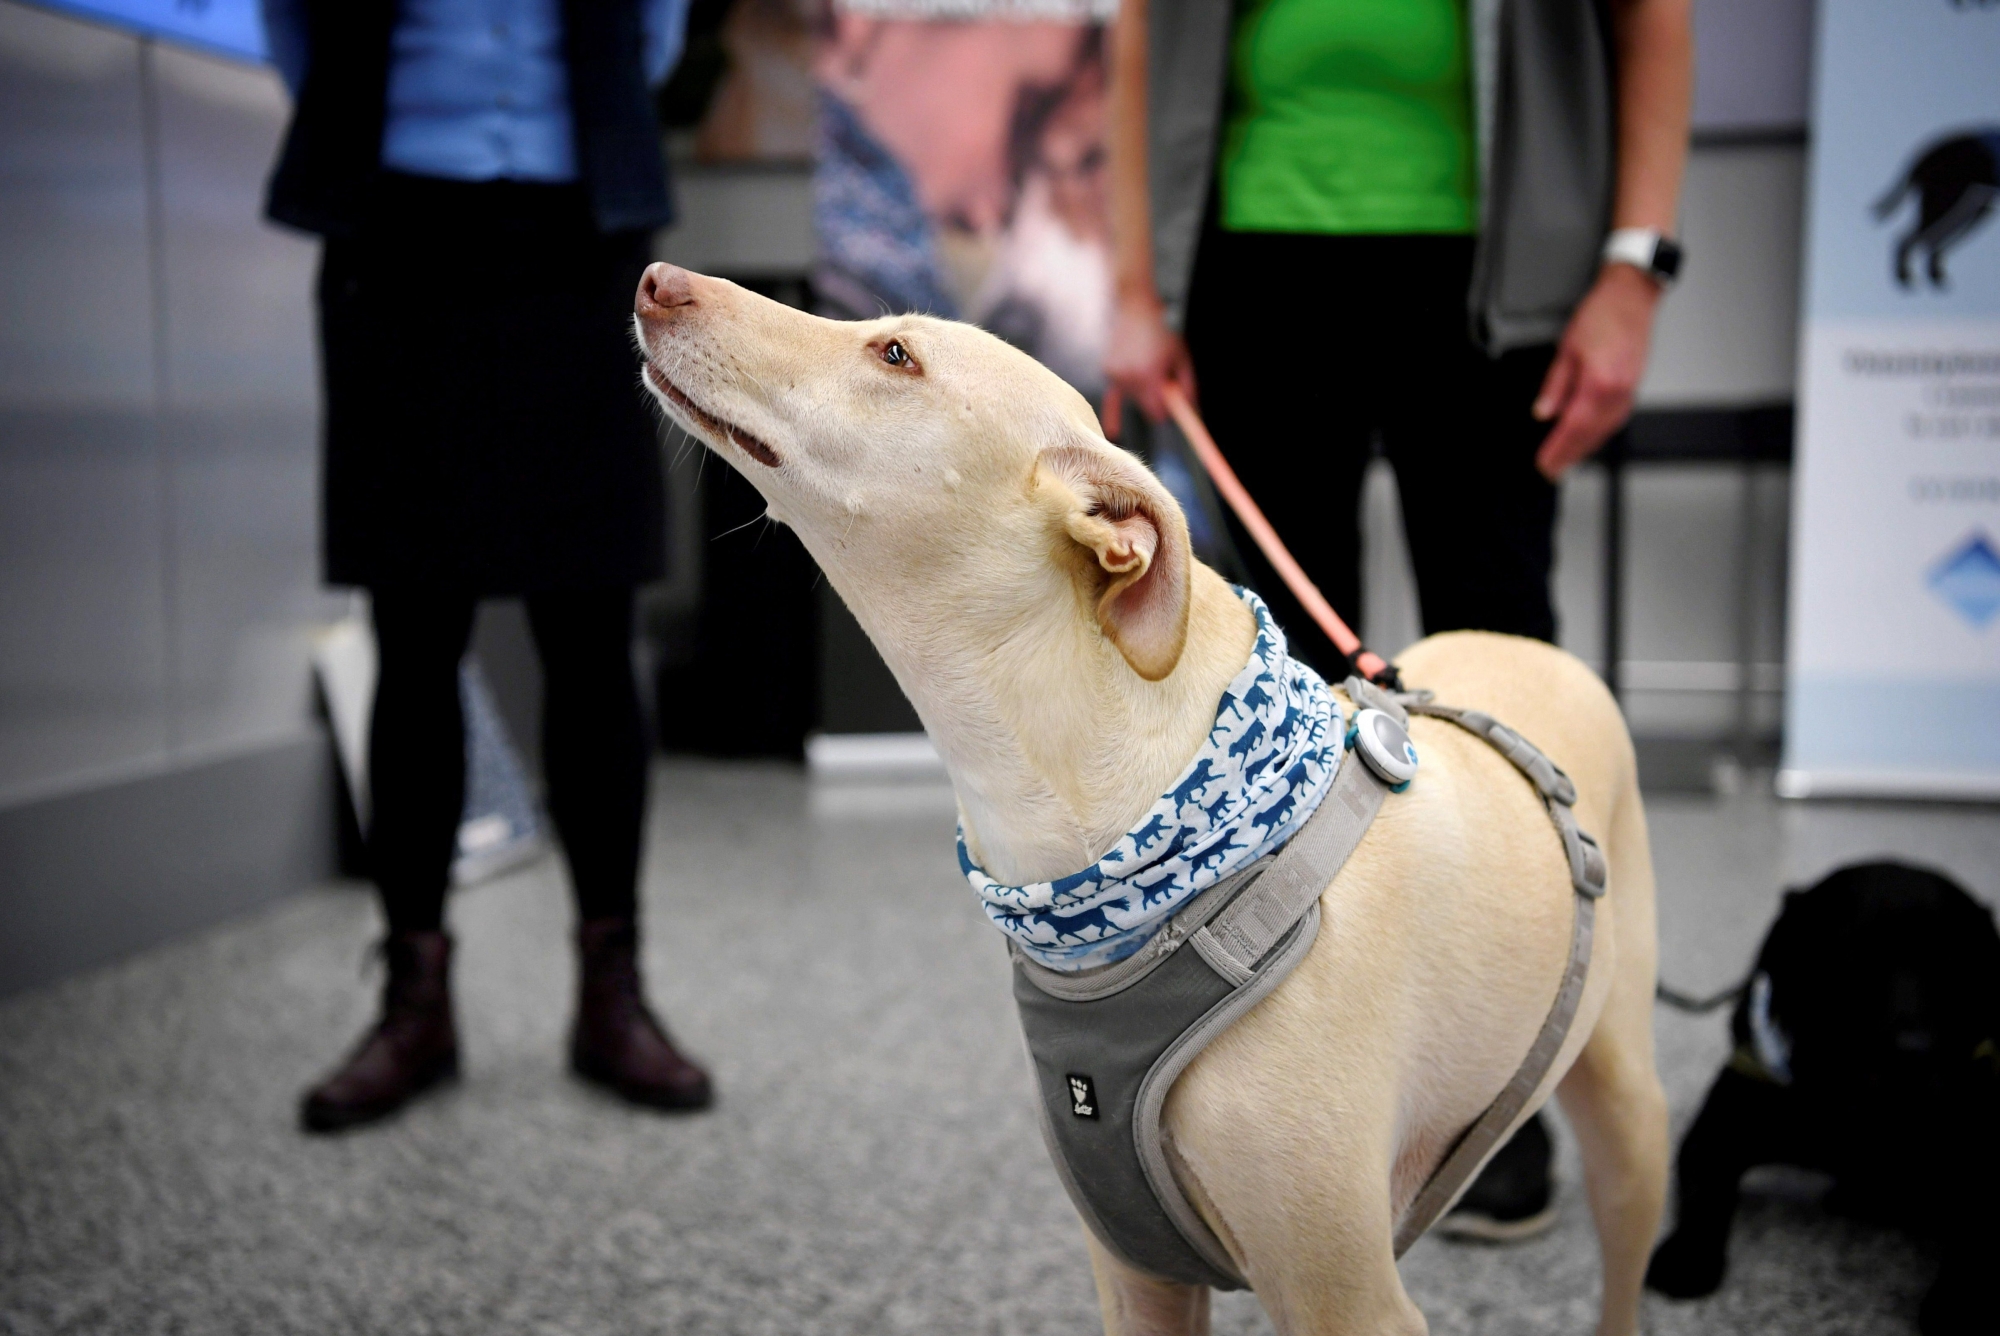 Sniffer dog K'ssi at the Helsinki airport in Vantaa, Finland, Wednesday Sept. 22, 2020. Finland has deployed coronavirus-sniffing dogs at the Nordic country‚Äôs main international airport in a four-month trial of an alternative testing method that could become a cost-friendly way to identify infected travelers. (Antti Aimo-Koivisto/Lehtikuva via AP) ArcInfo